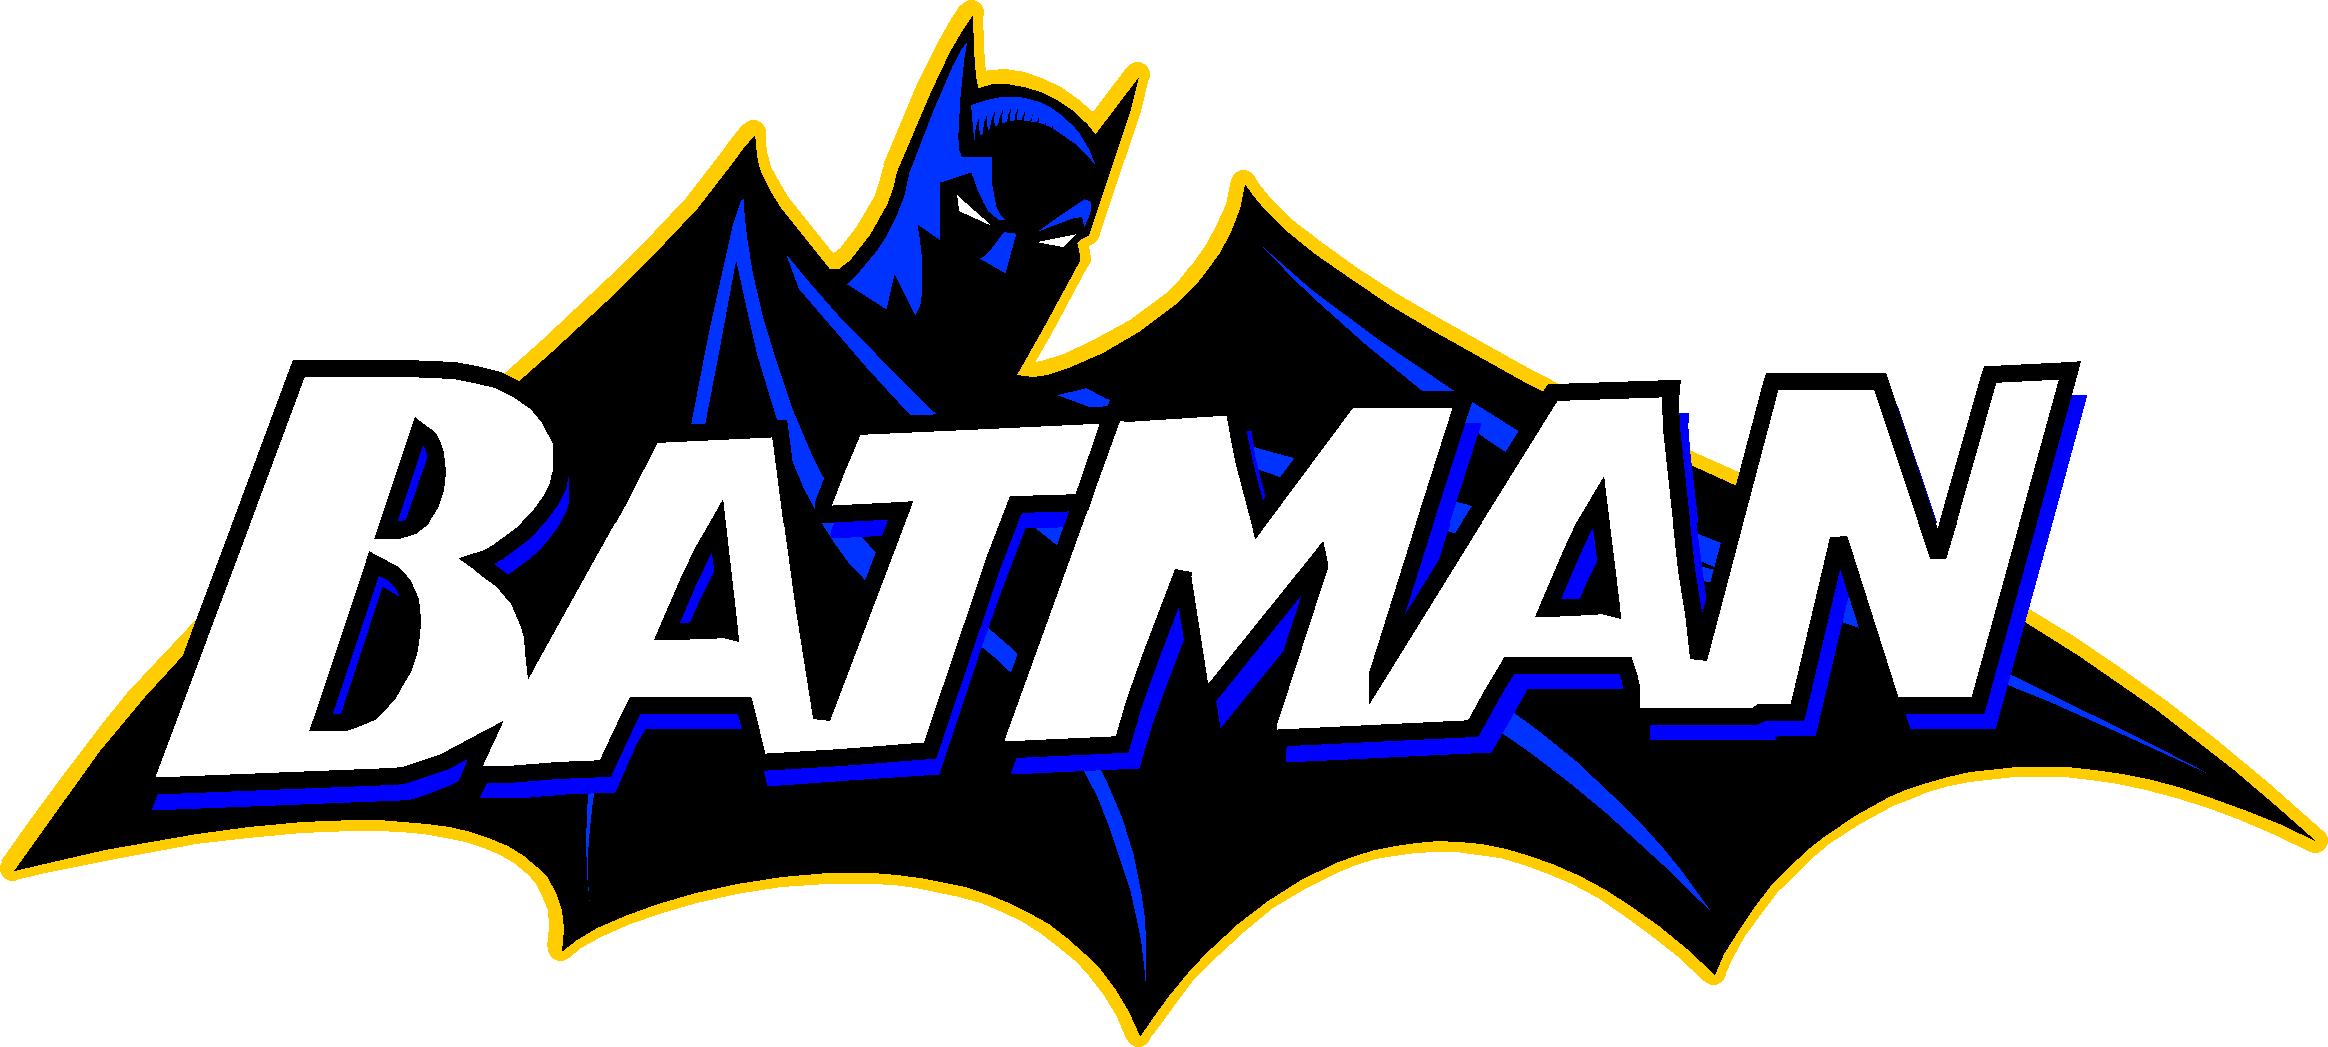 The The Batman Title Logo Wallpapers